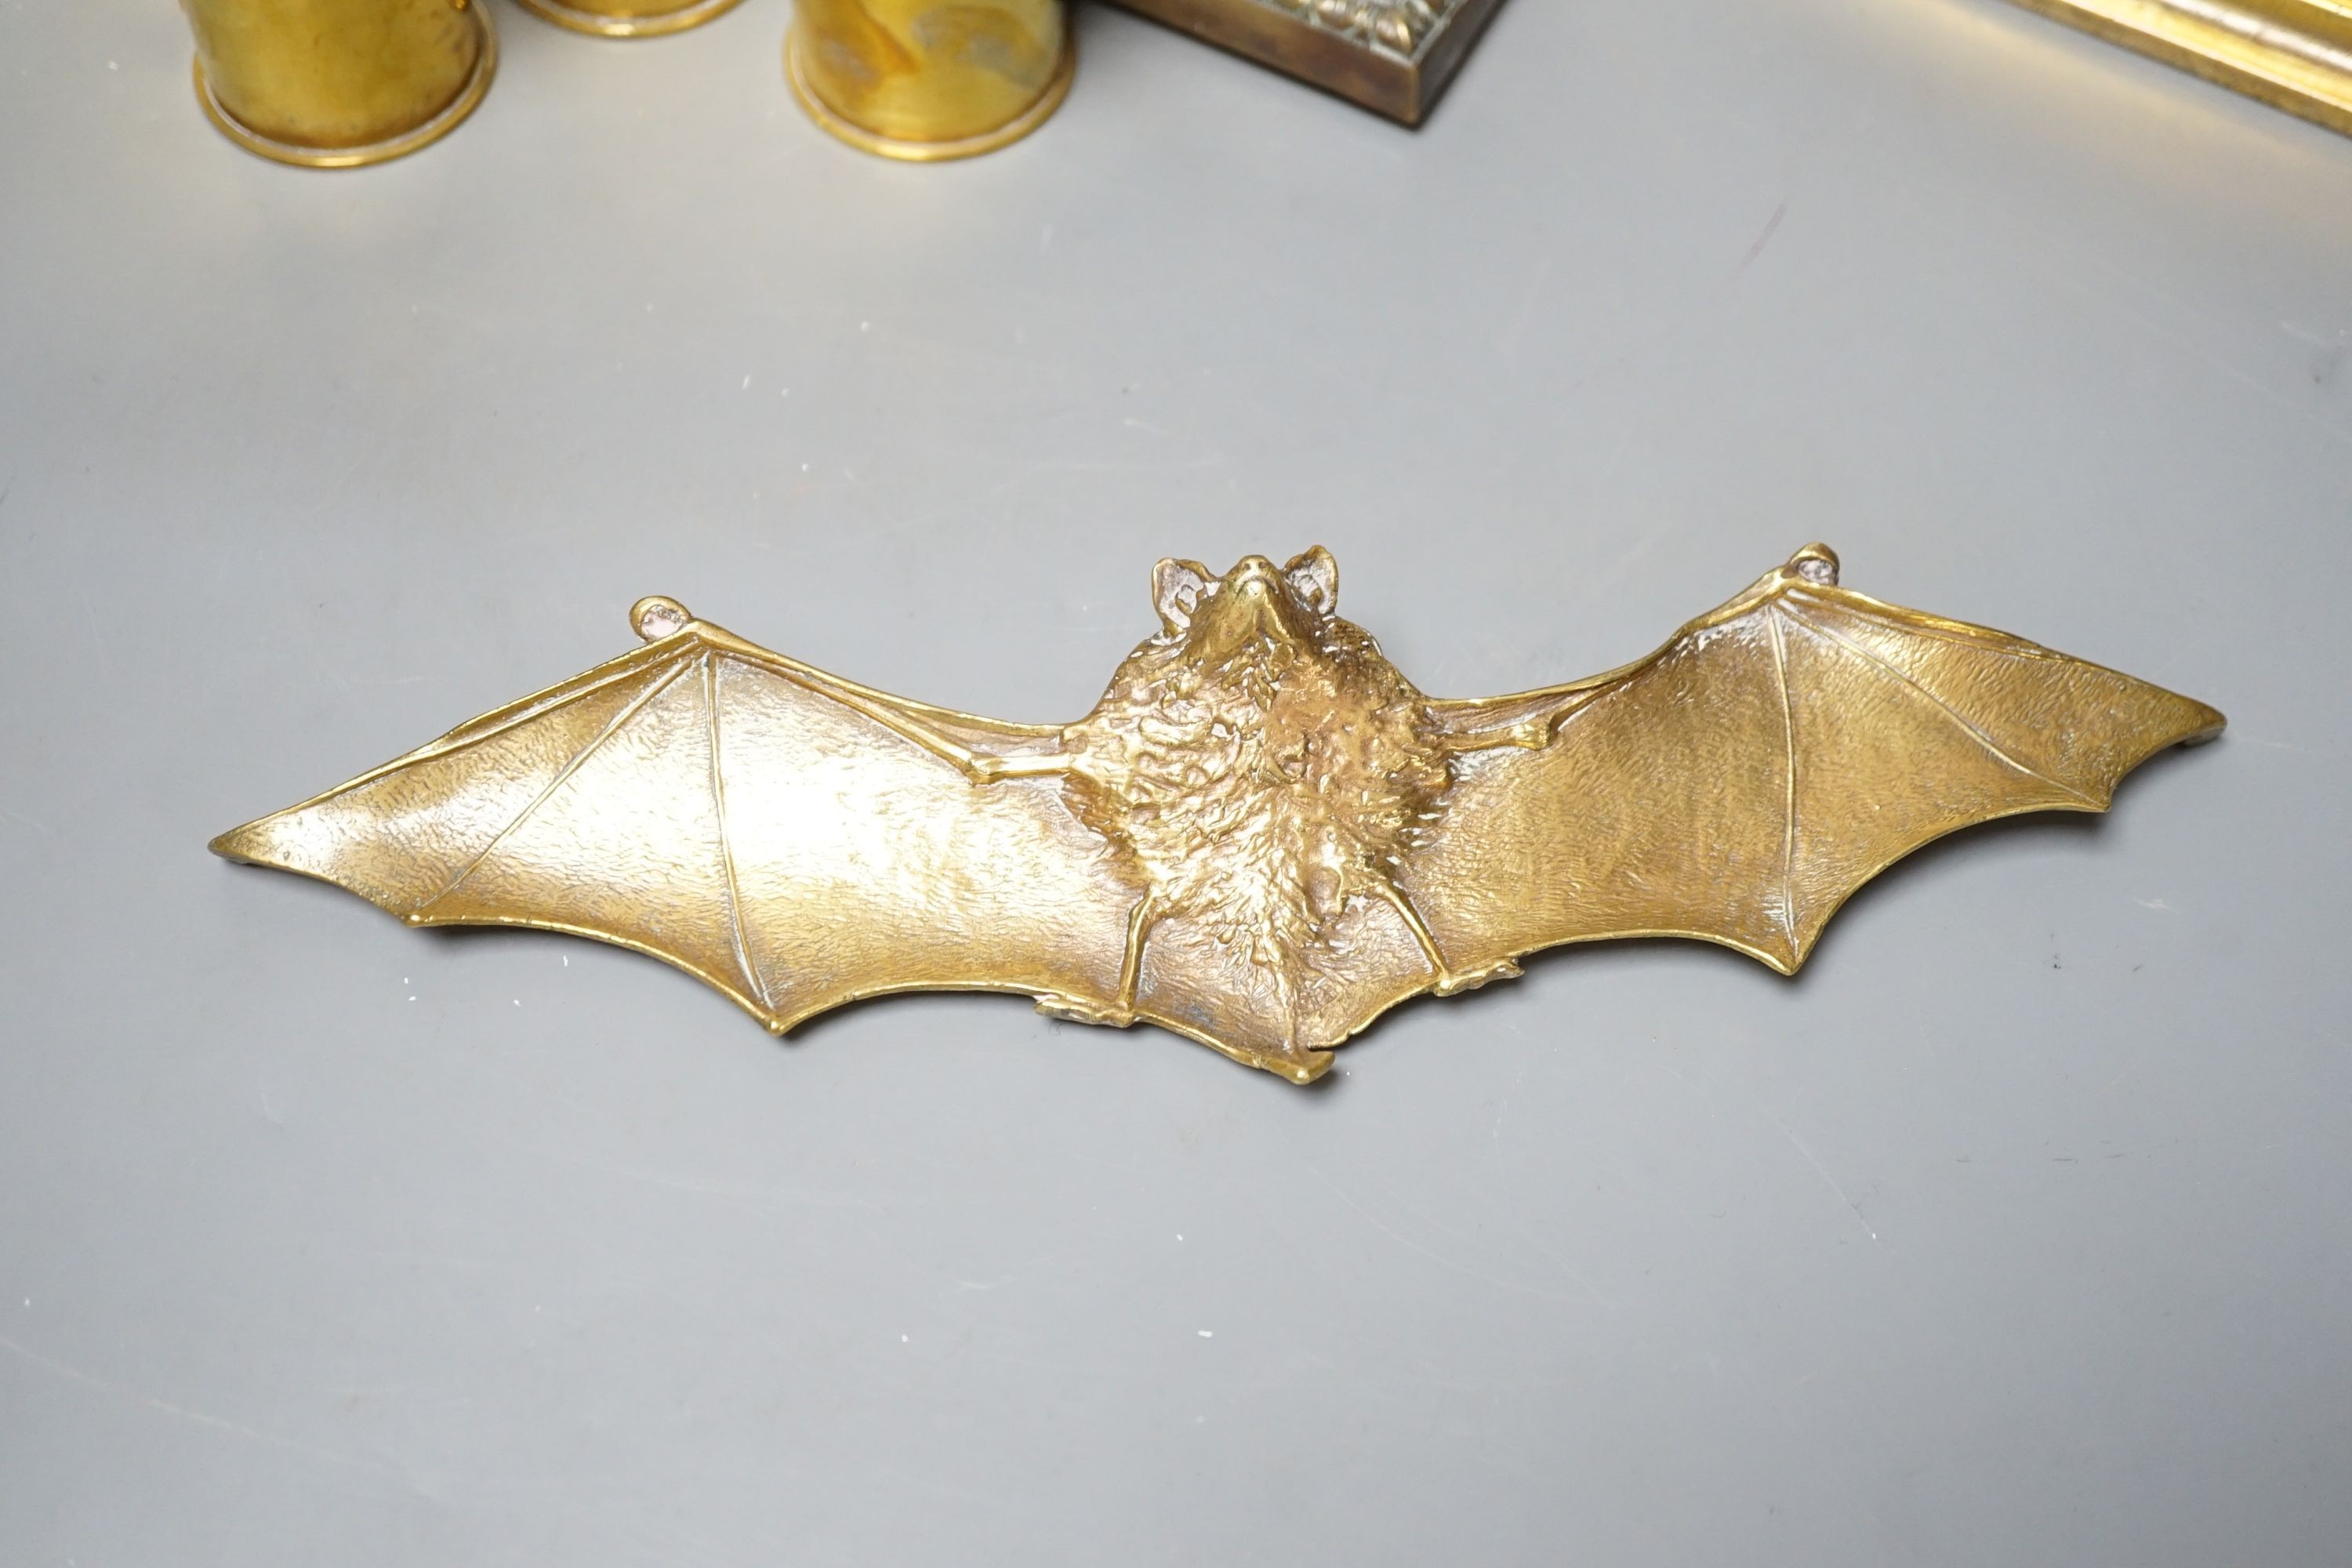 A brass ‘bat’ pin tray, two lion figures and sundry metalware, lion door stop 20 cms height x 25 cms width